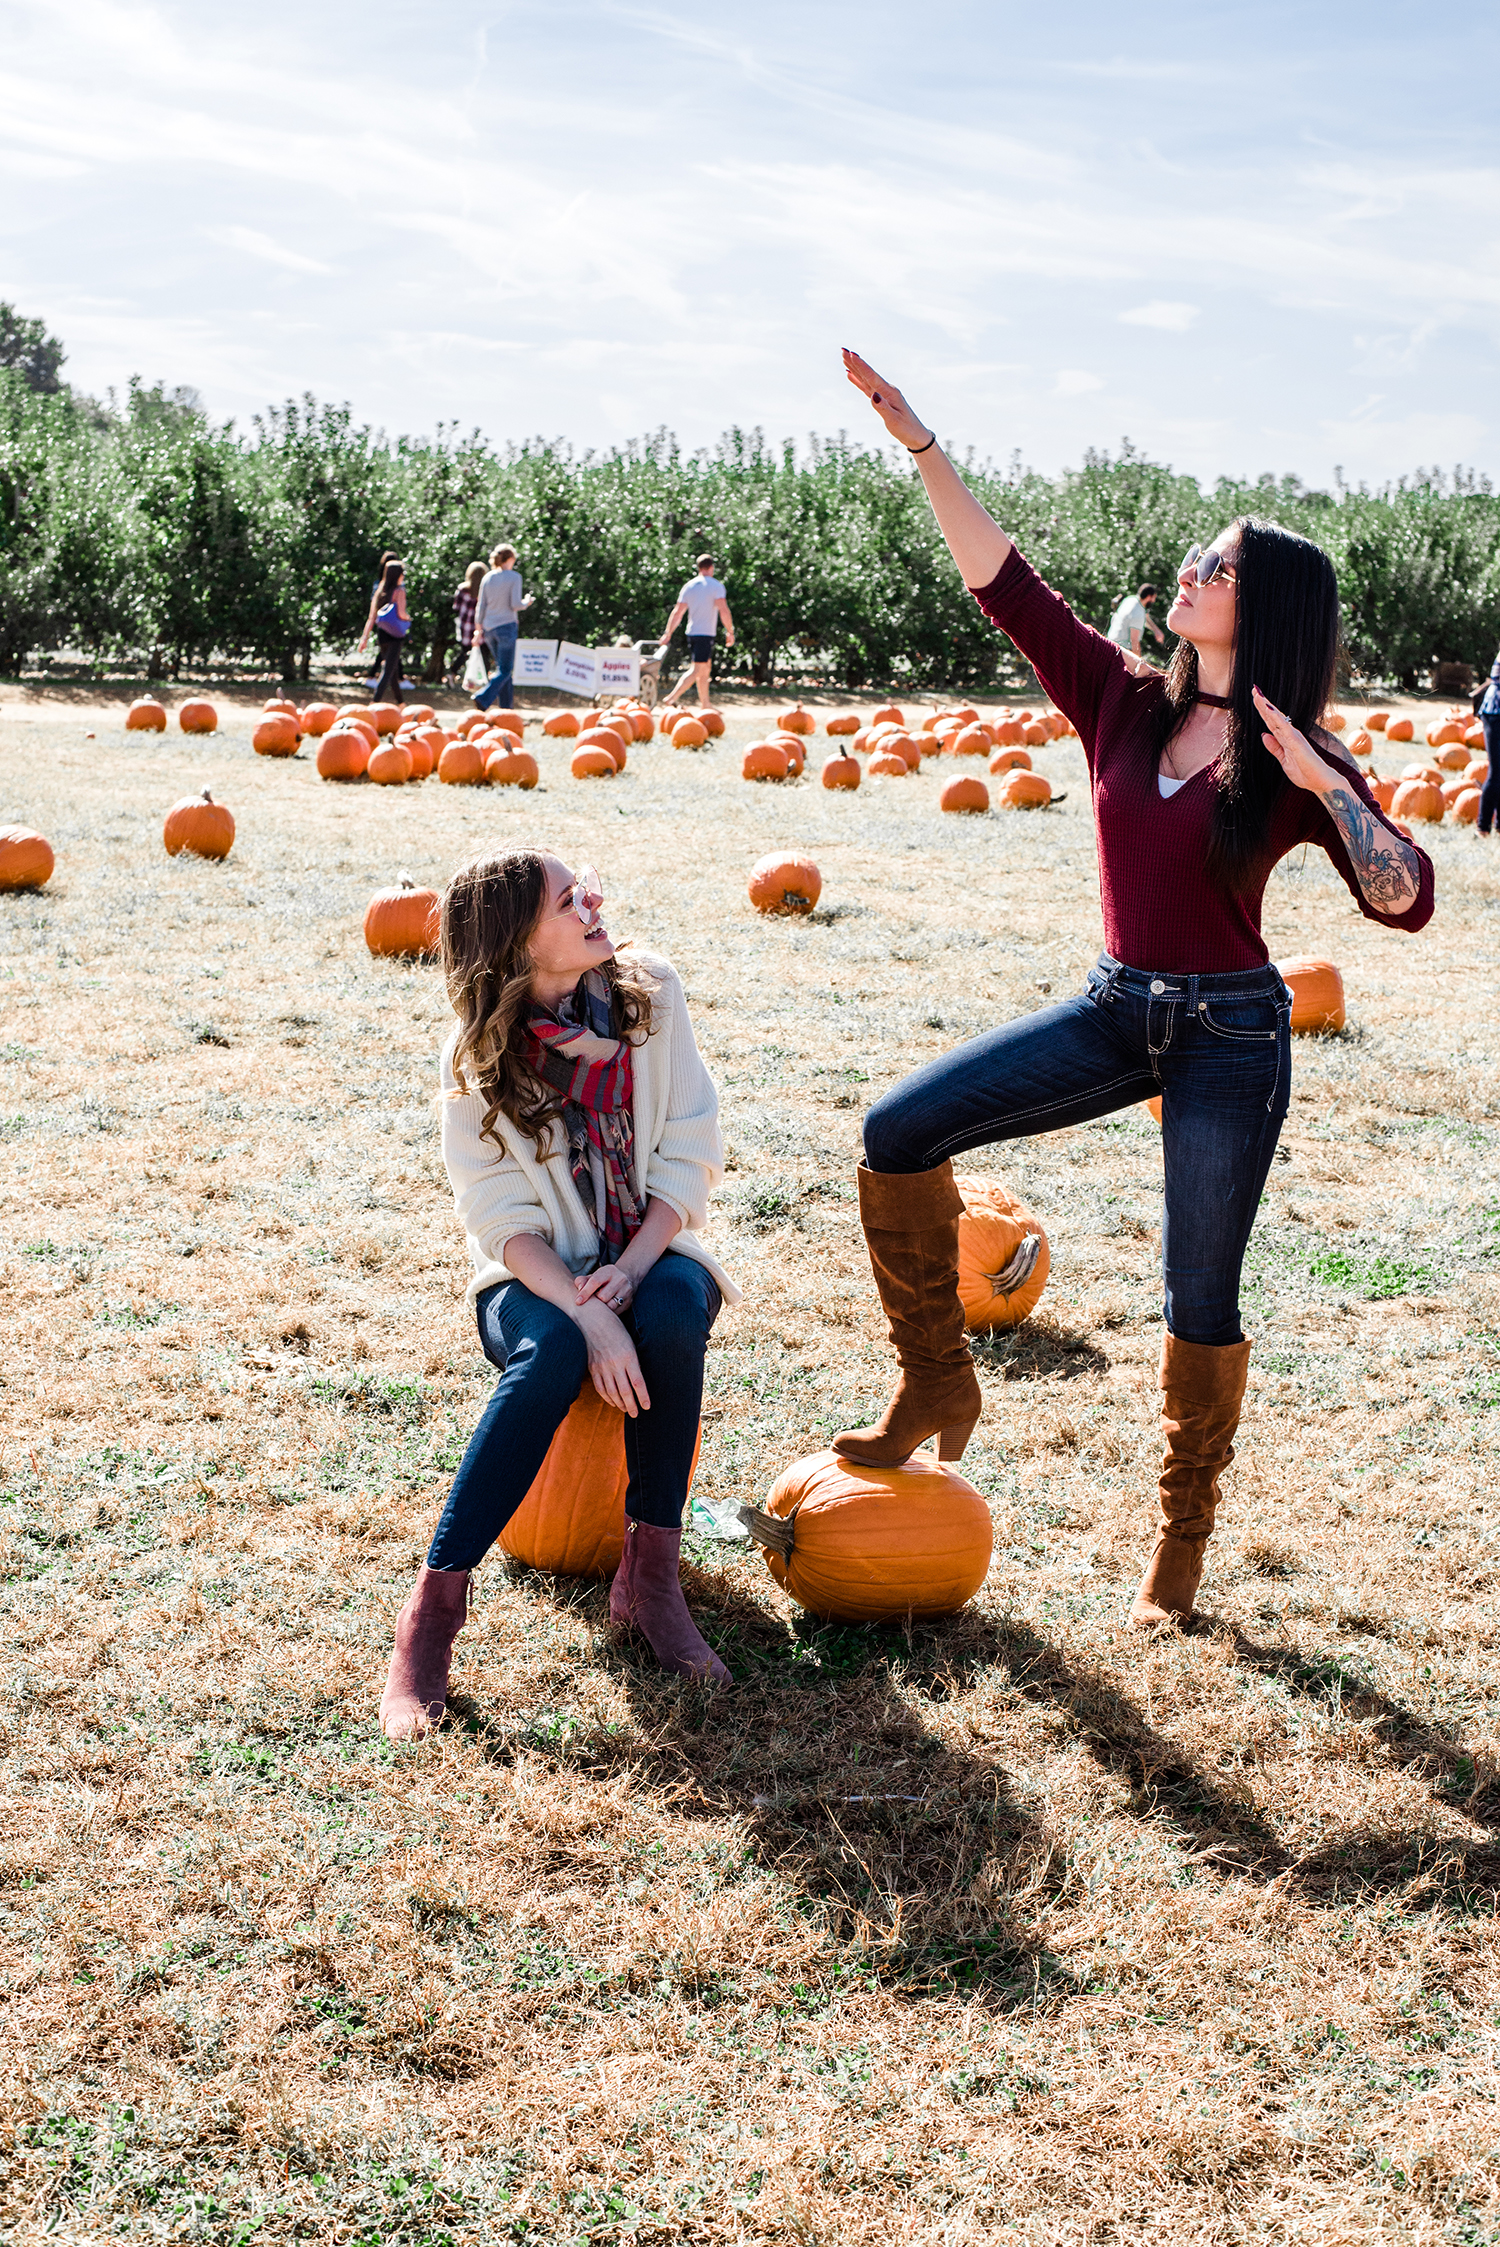 Alyssa Campanella of The A List blog goes apple picking in New Jersey with her sister Jessica wearing M Gemi Corsa boot